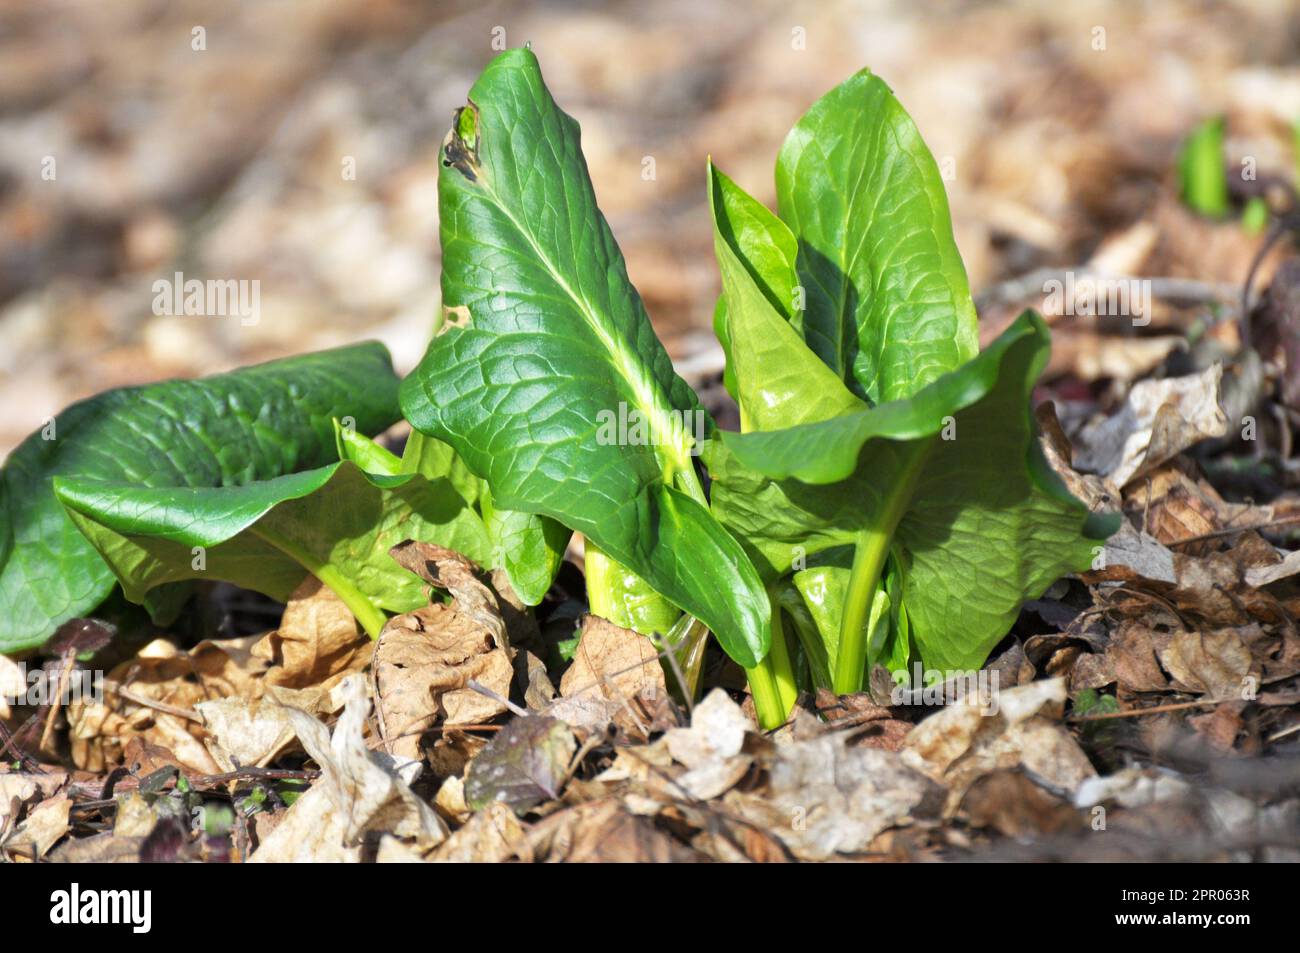 Arum (Arum besserianum) grows in the forest in early spring. Stock Photo